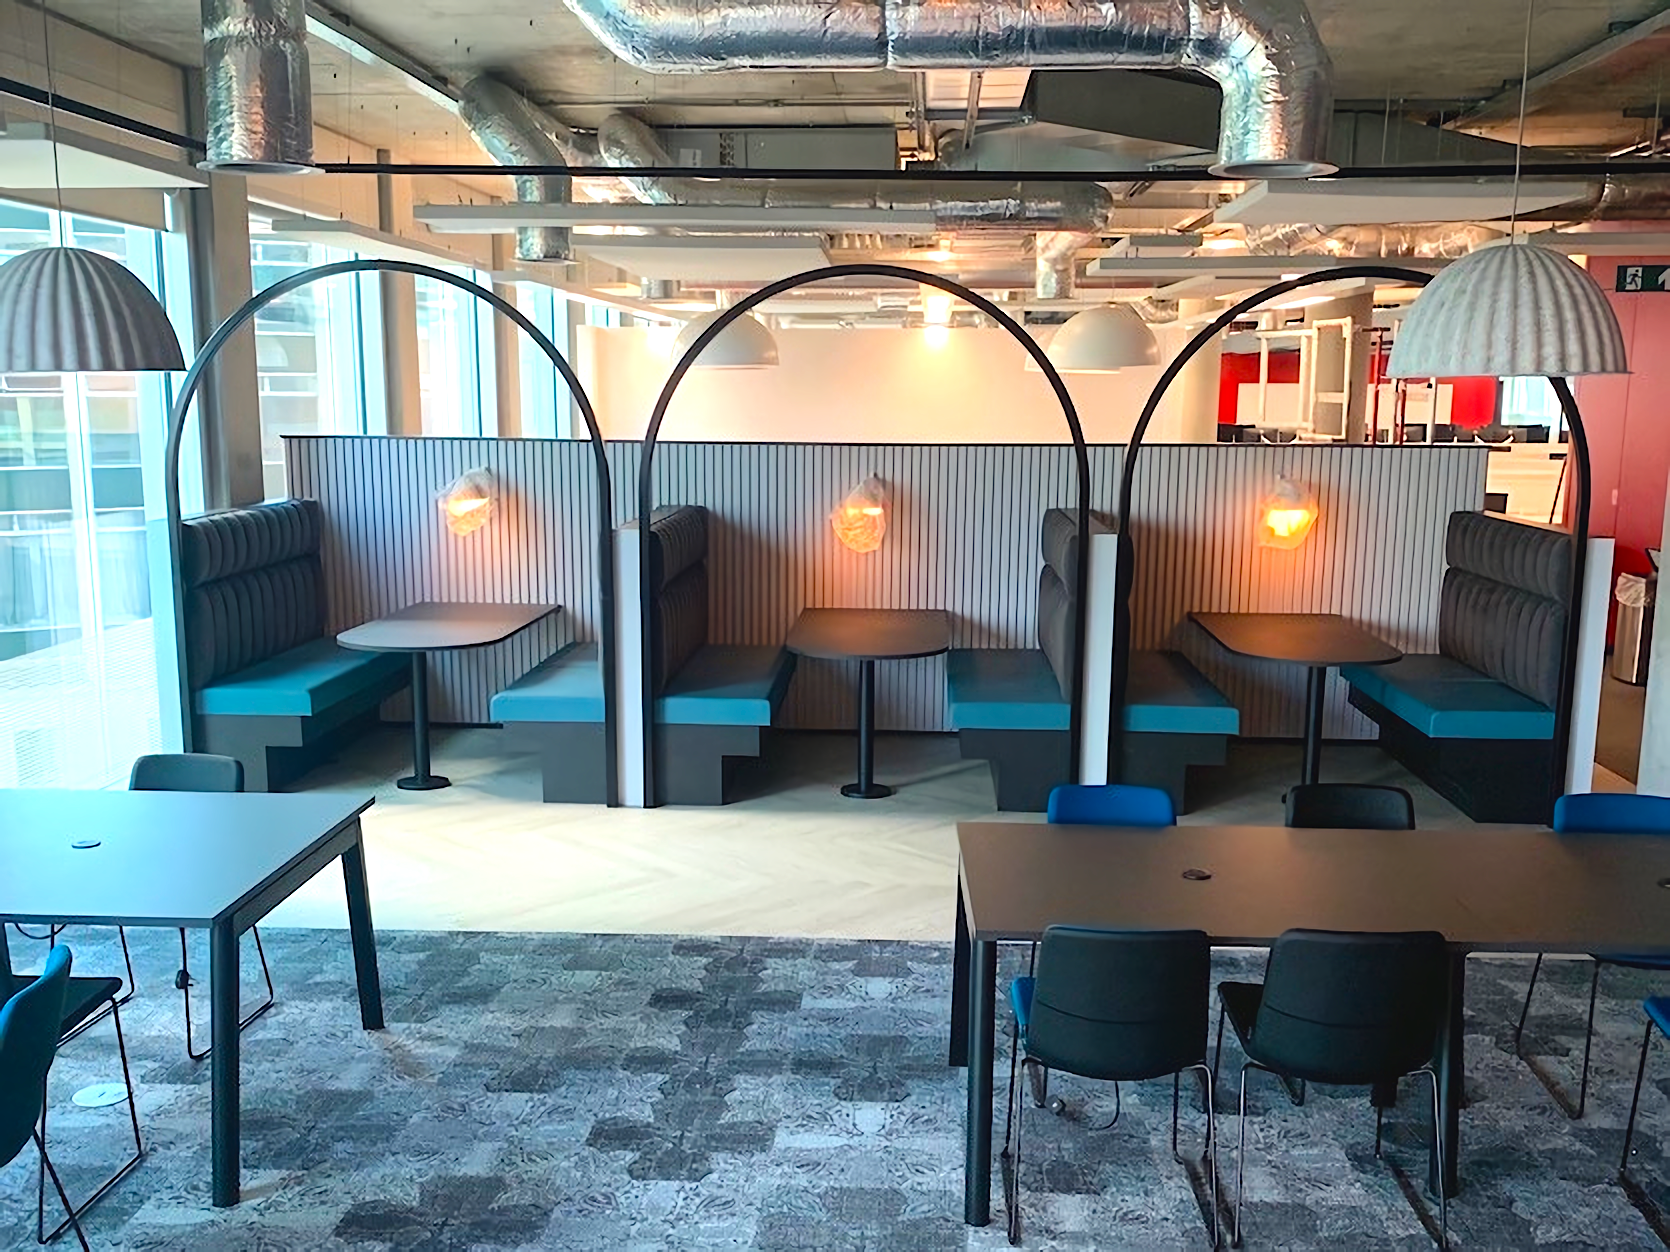 Bespoke seating booths featuring architectural hoops and banquette seating